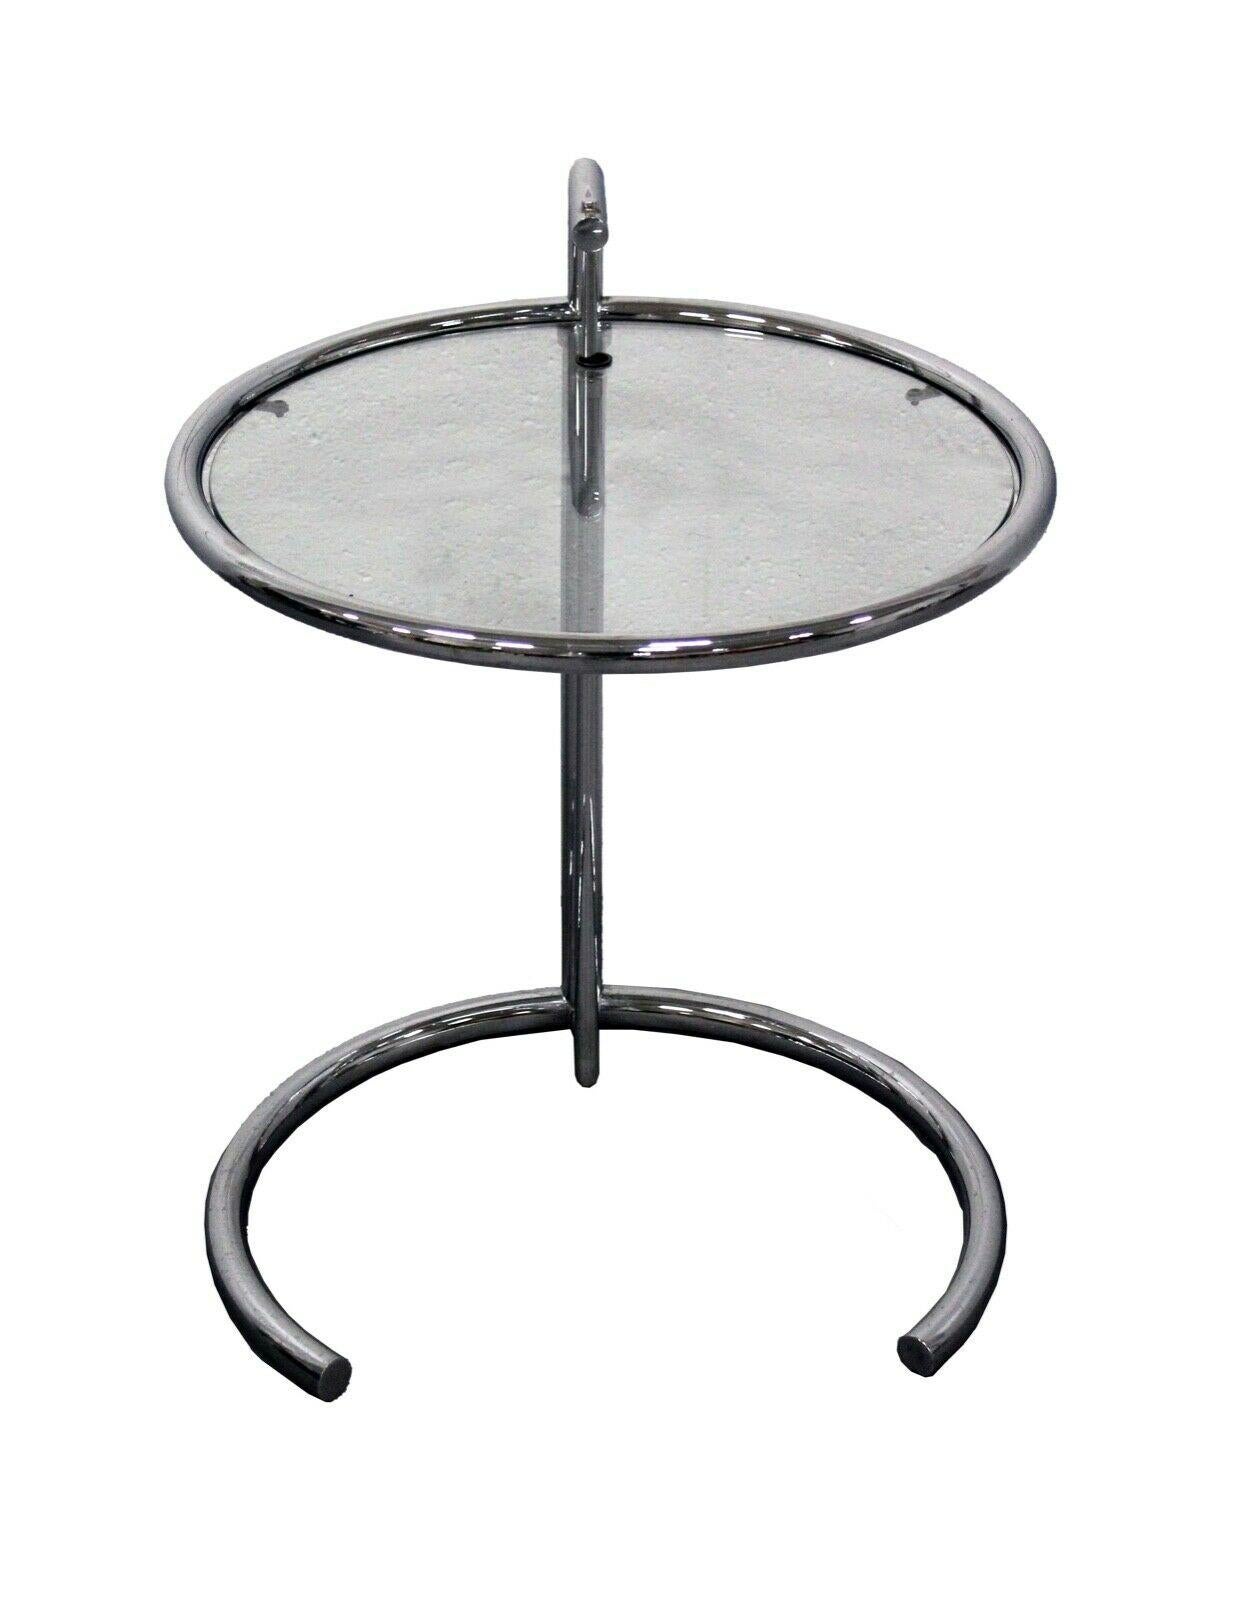 For your consideration is this iconic Eileen gray adjustable chrome side table with a glass top. Dimensions: 20 diam x 25/32h.
 